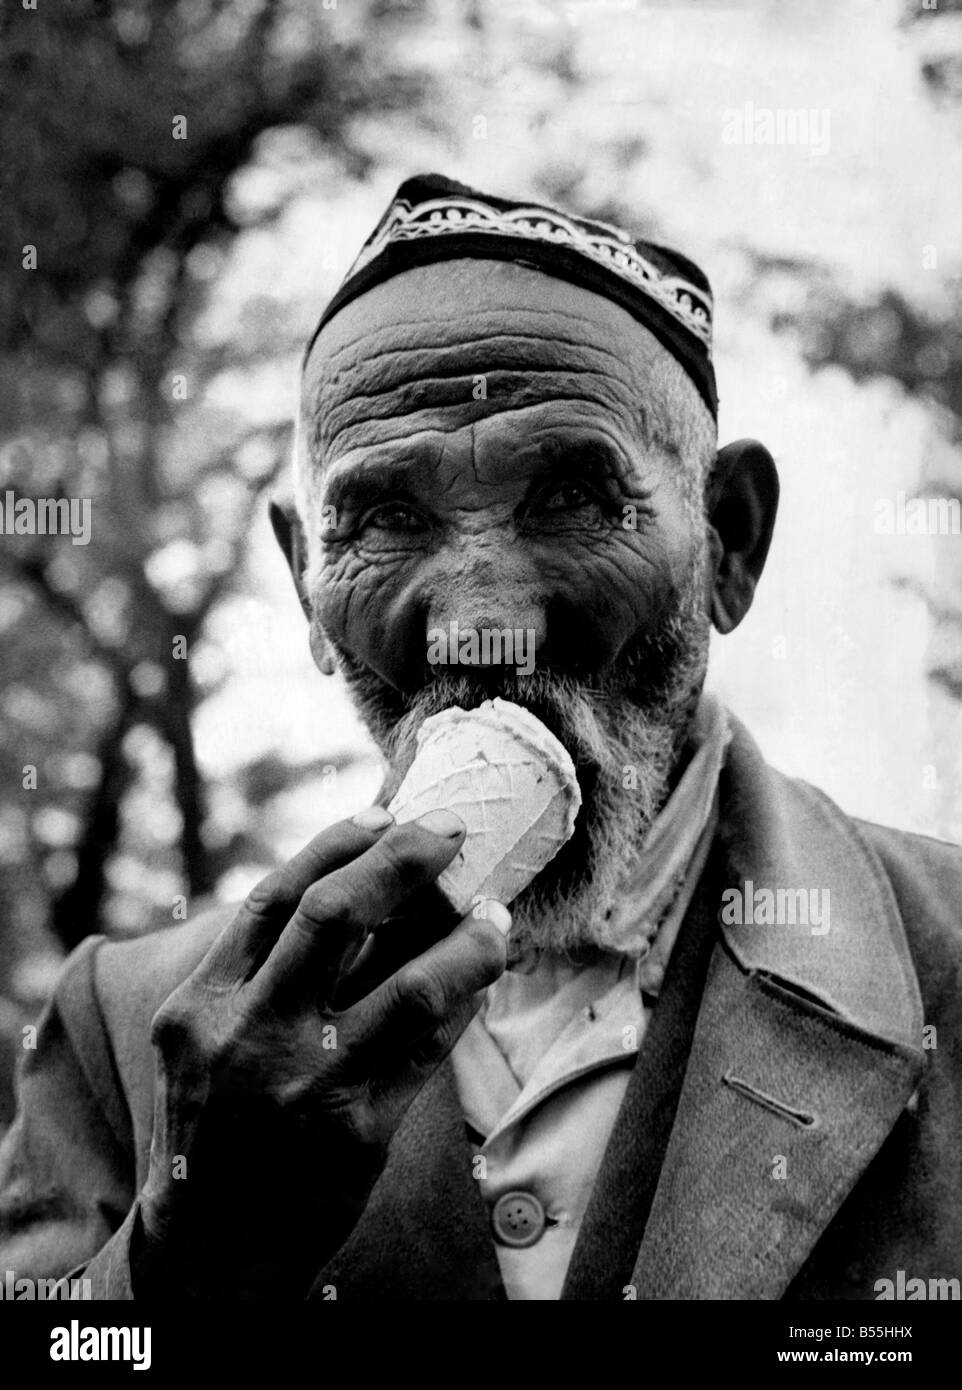 A citizen of  one of the U.S.S.R.' central states seen here enjoying an ice cream. December 1960 P012643 Stock Photo